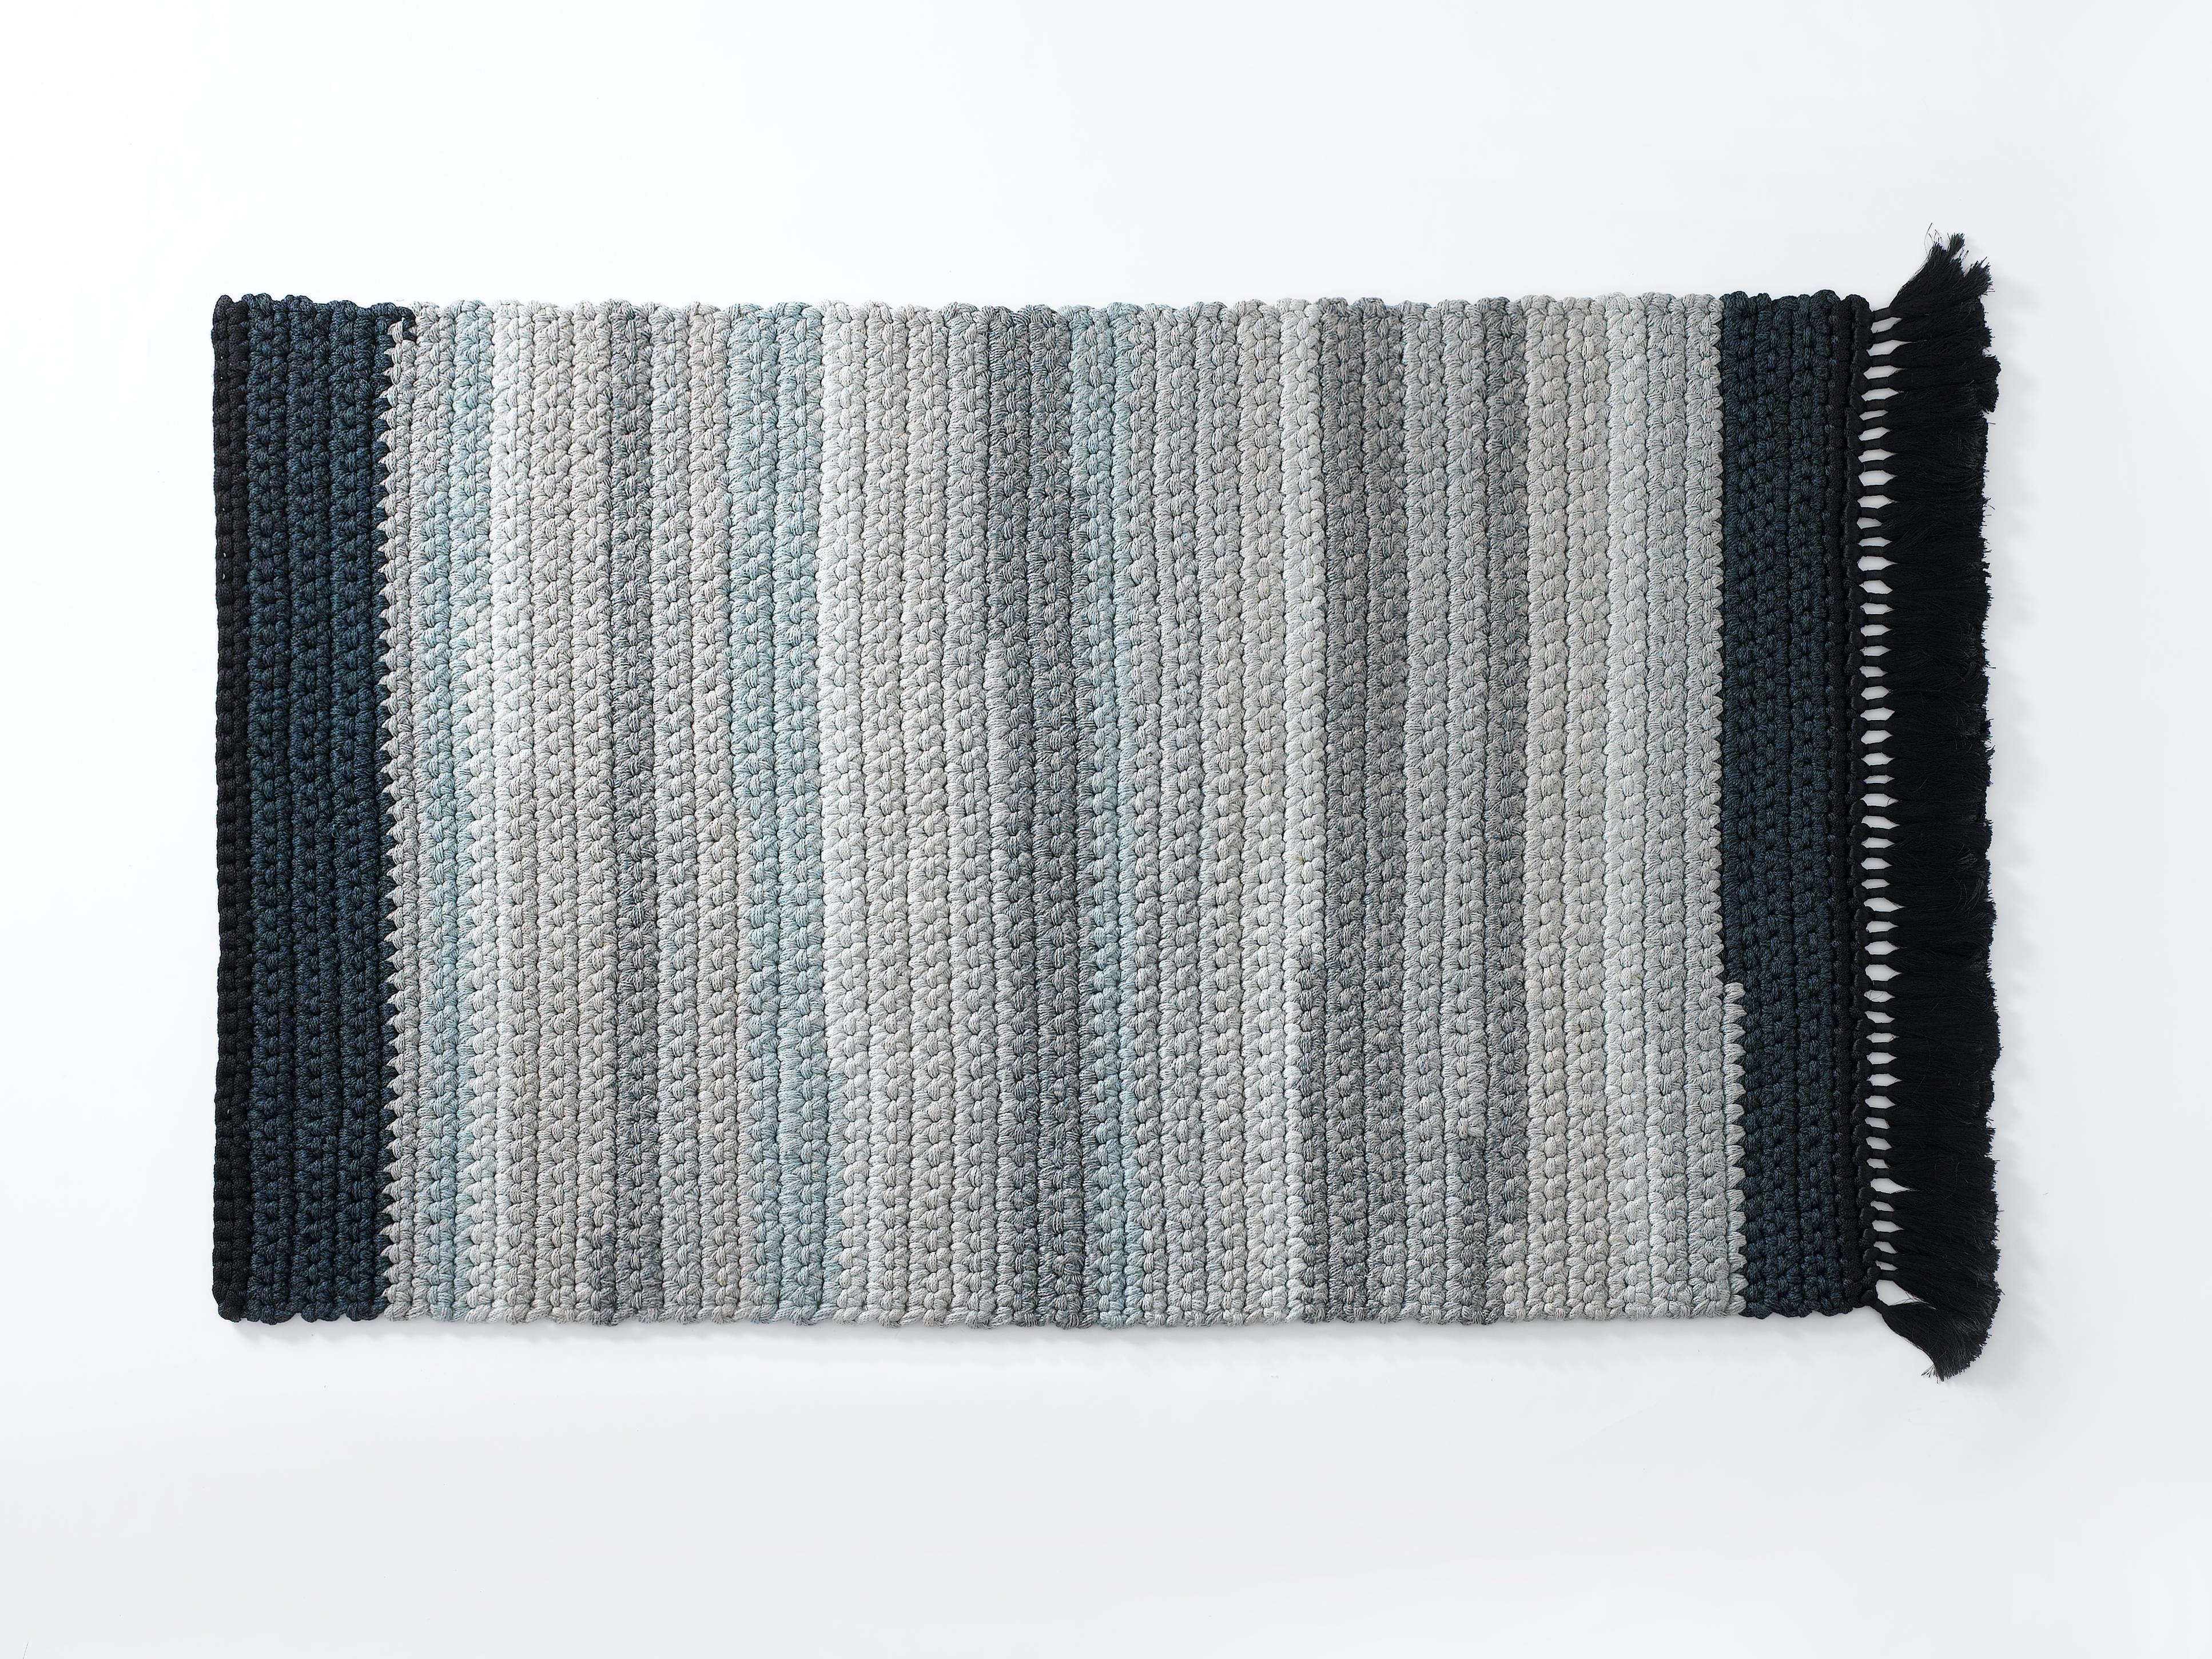 A blue and stone gradient rug that will light up any space, suitable for an intimate corner in the living space as well as for bedrooms, corridors and passages. This rug is 100% hand knit out of one continuous, color changing, soft machine knit yarn